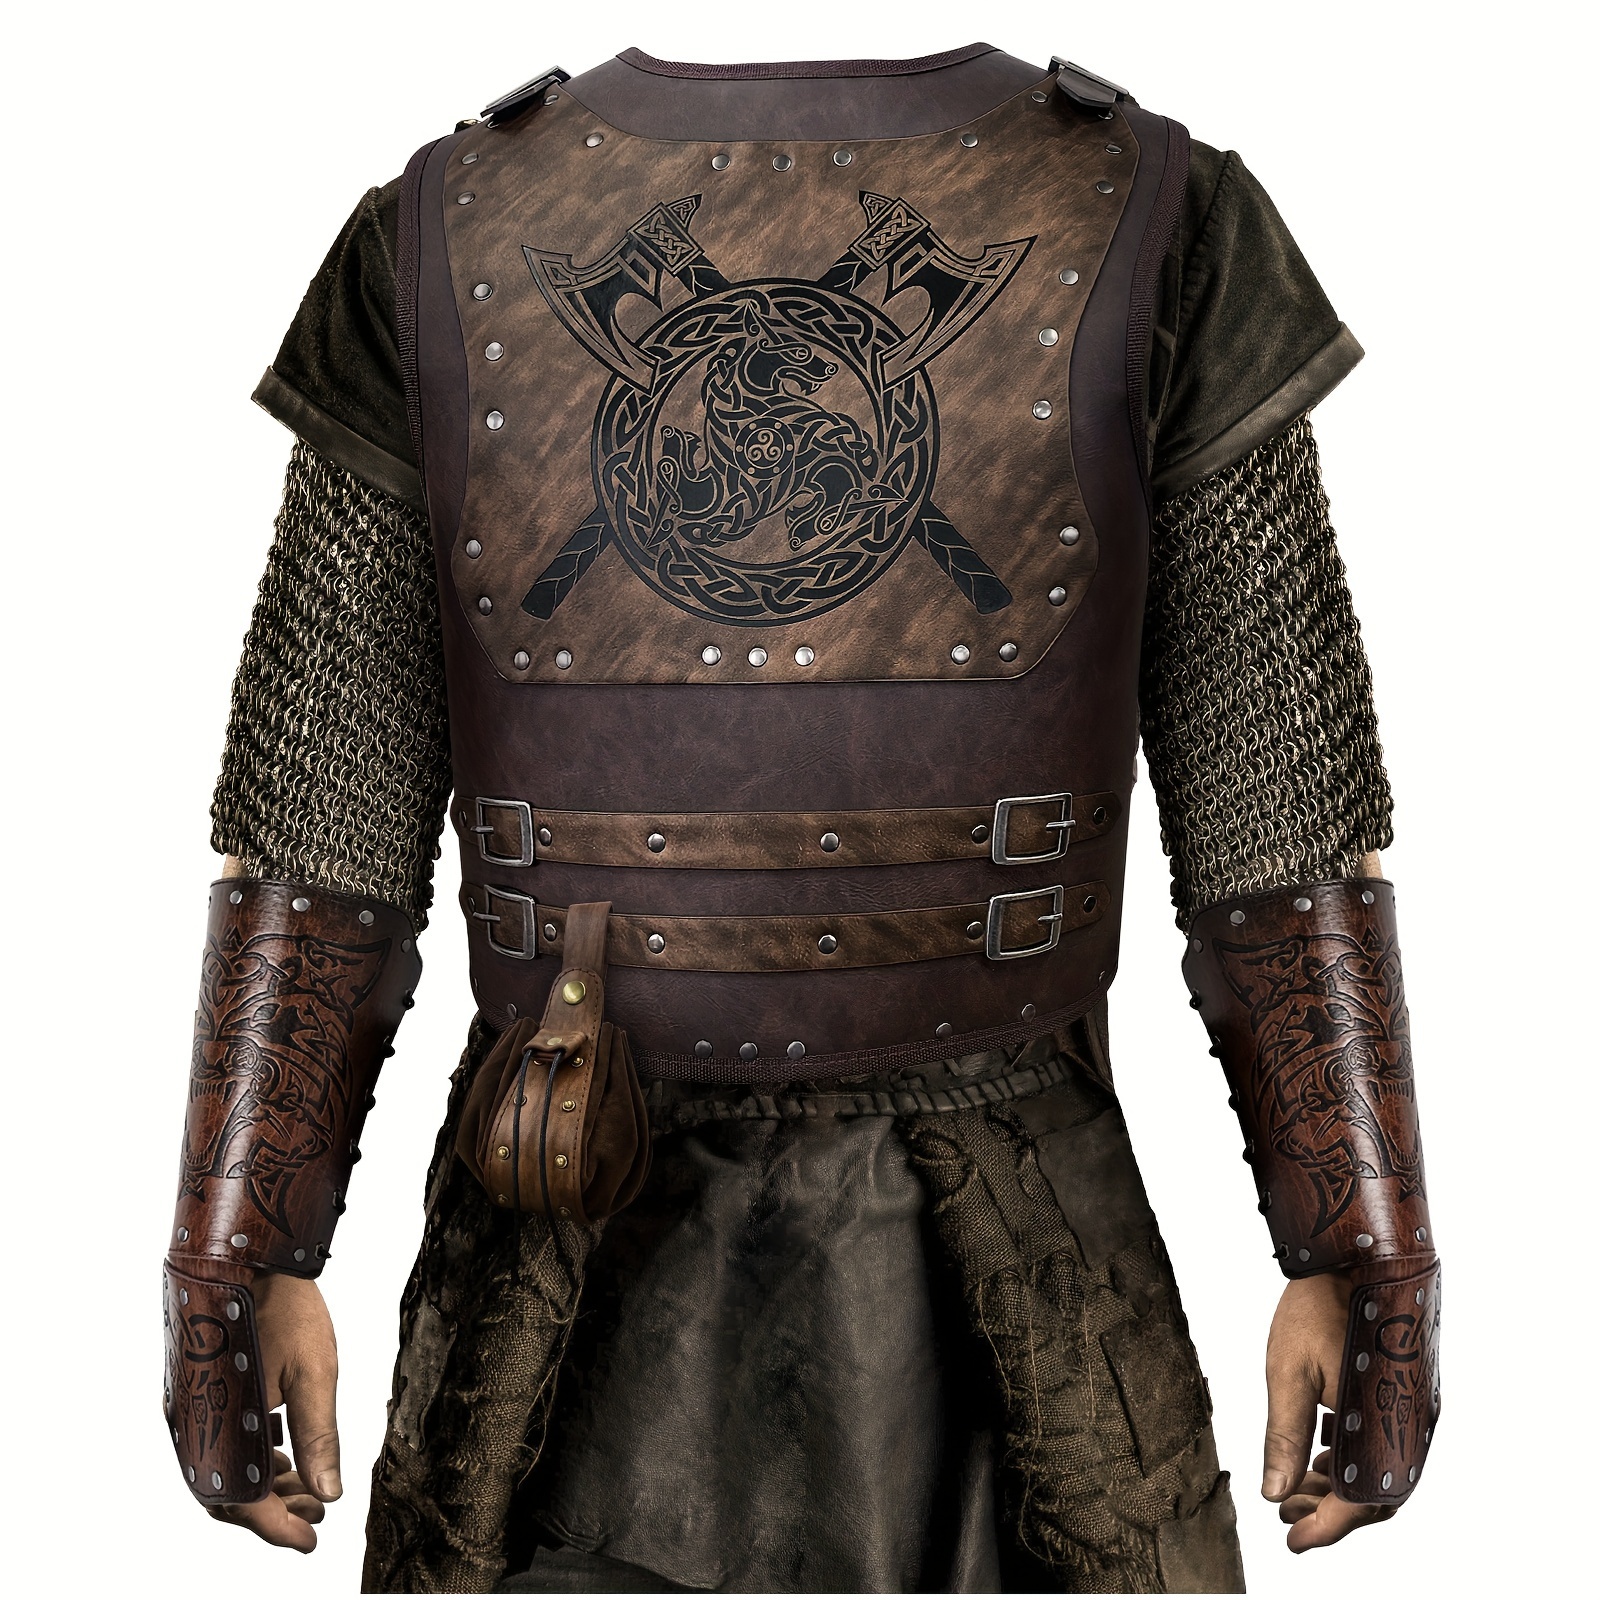 Chainmail Shirt W/ Full Sleeves Warrior's Costume - Wearable Costume Armor